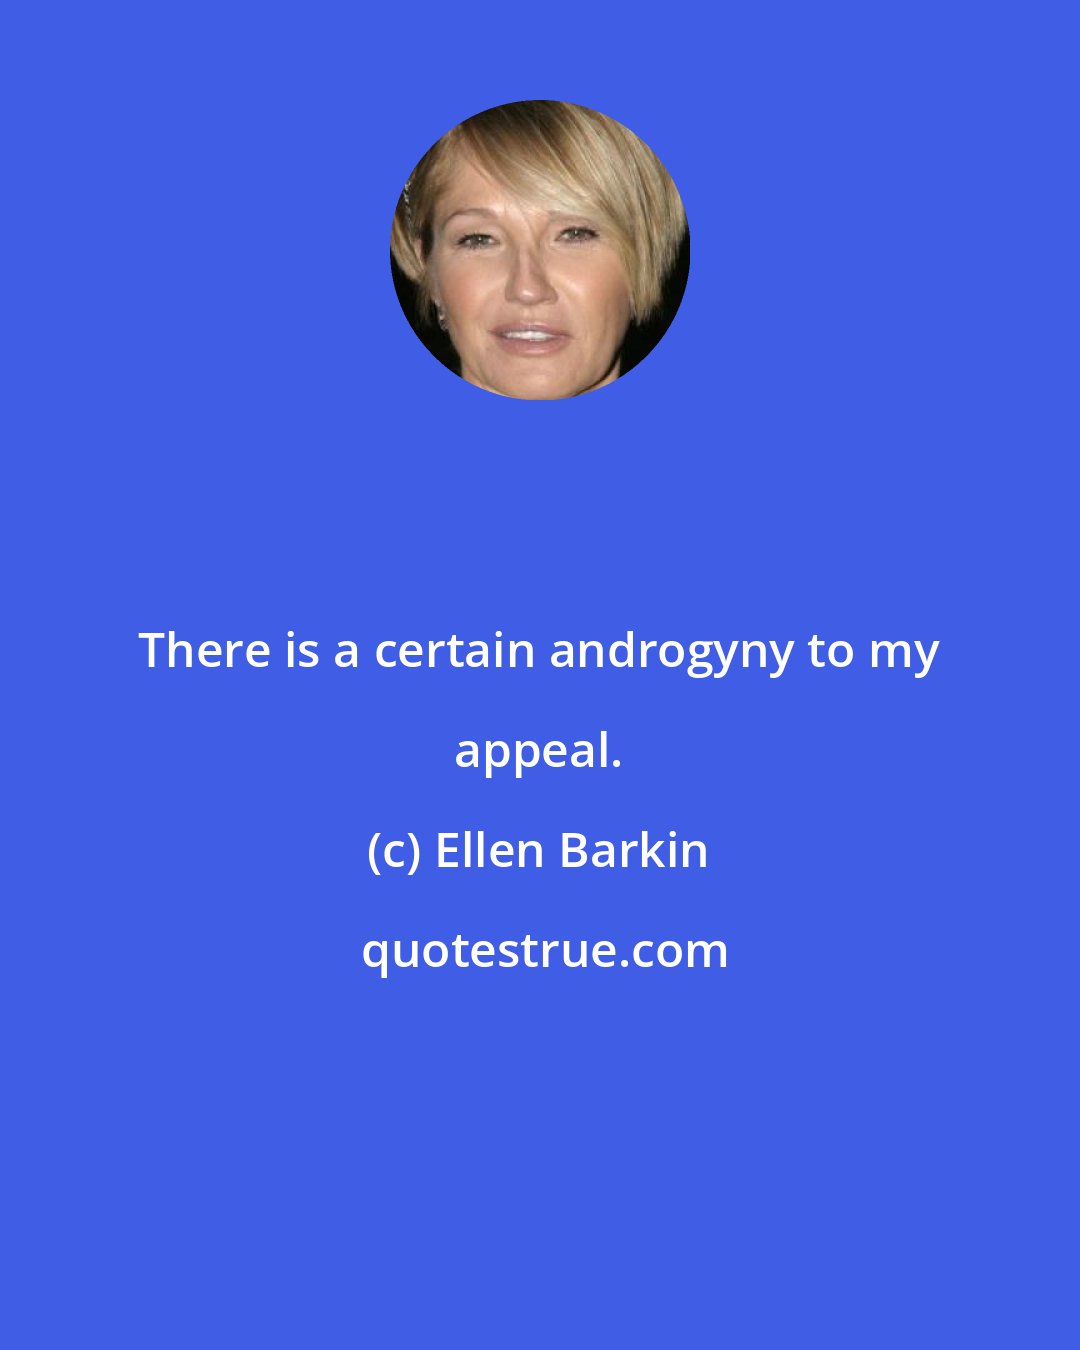 Ellen Barkin: There is a certain androgyny to my appeal.